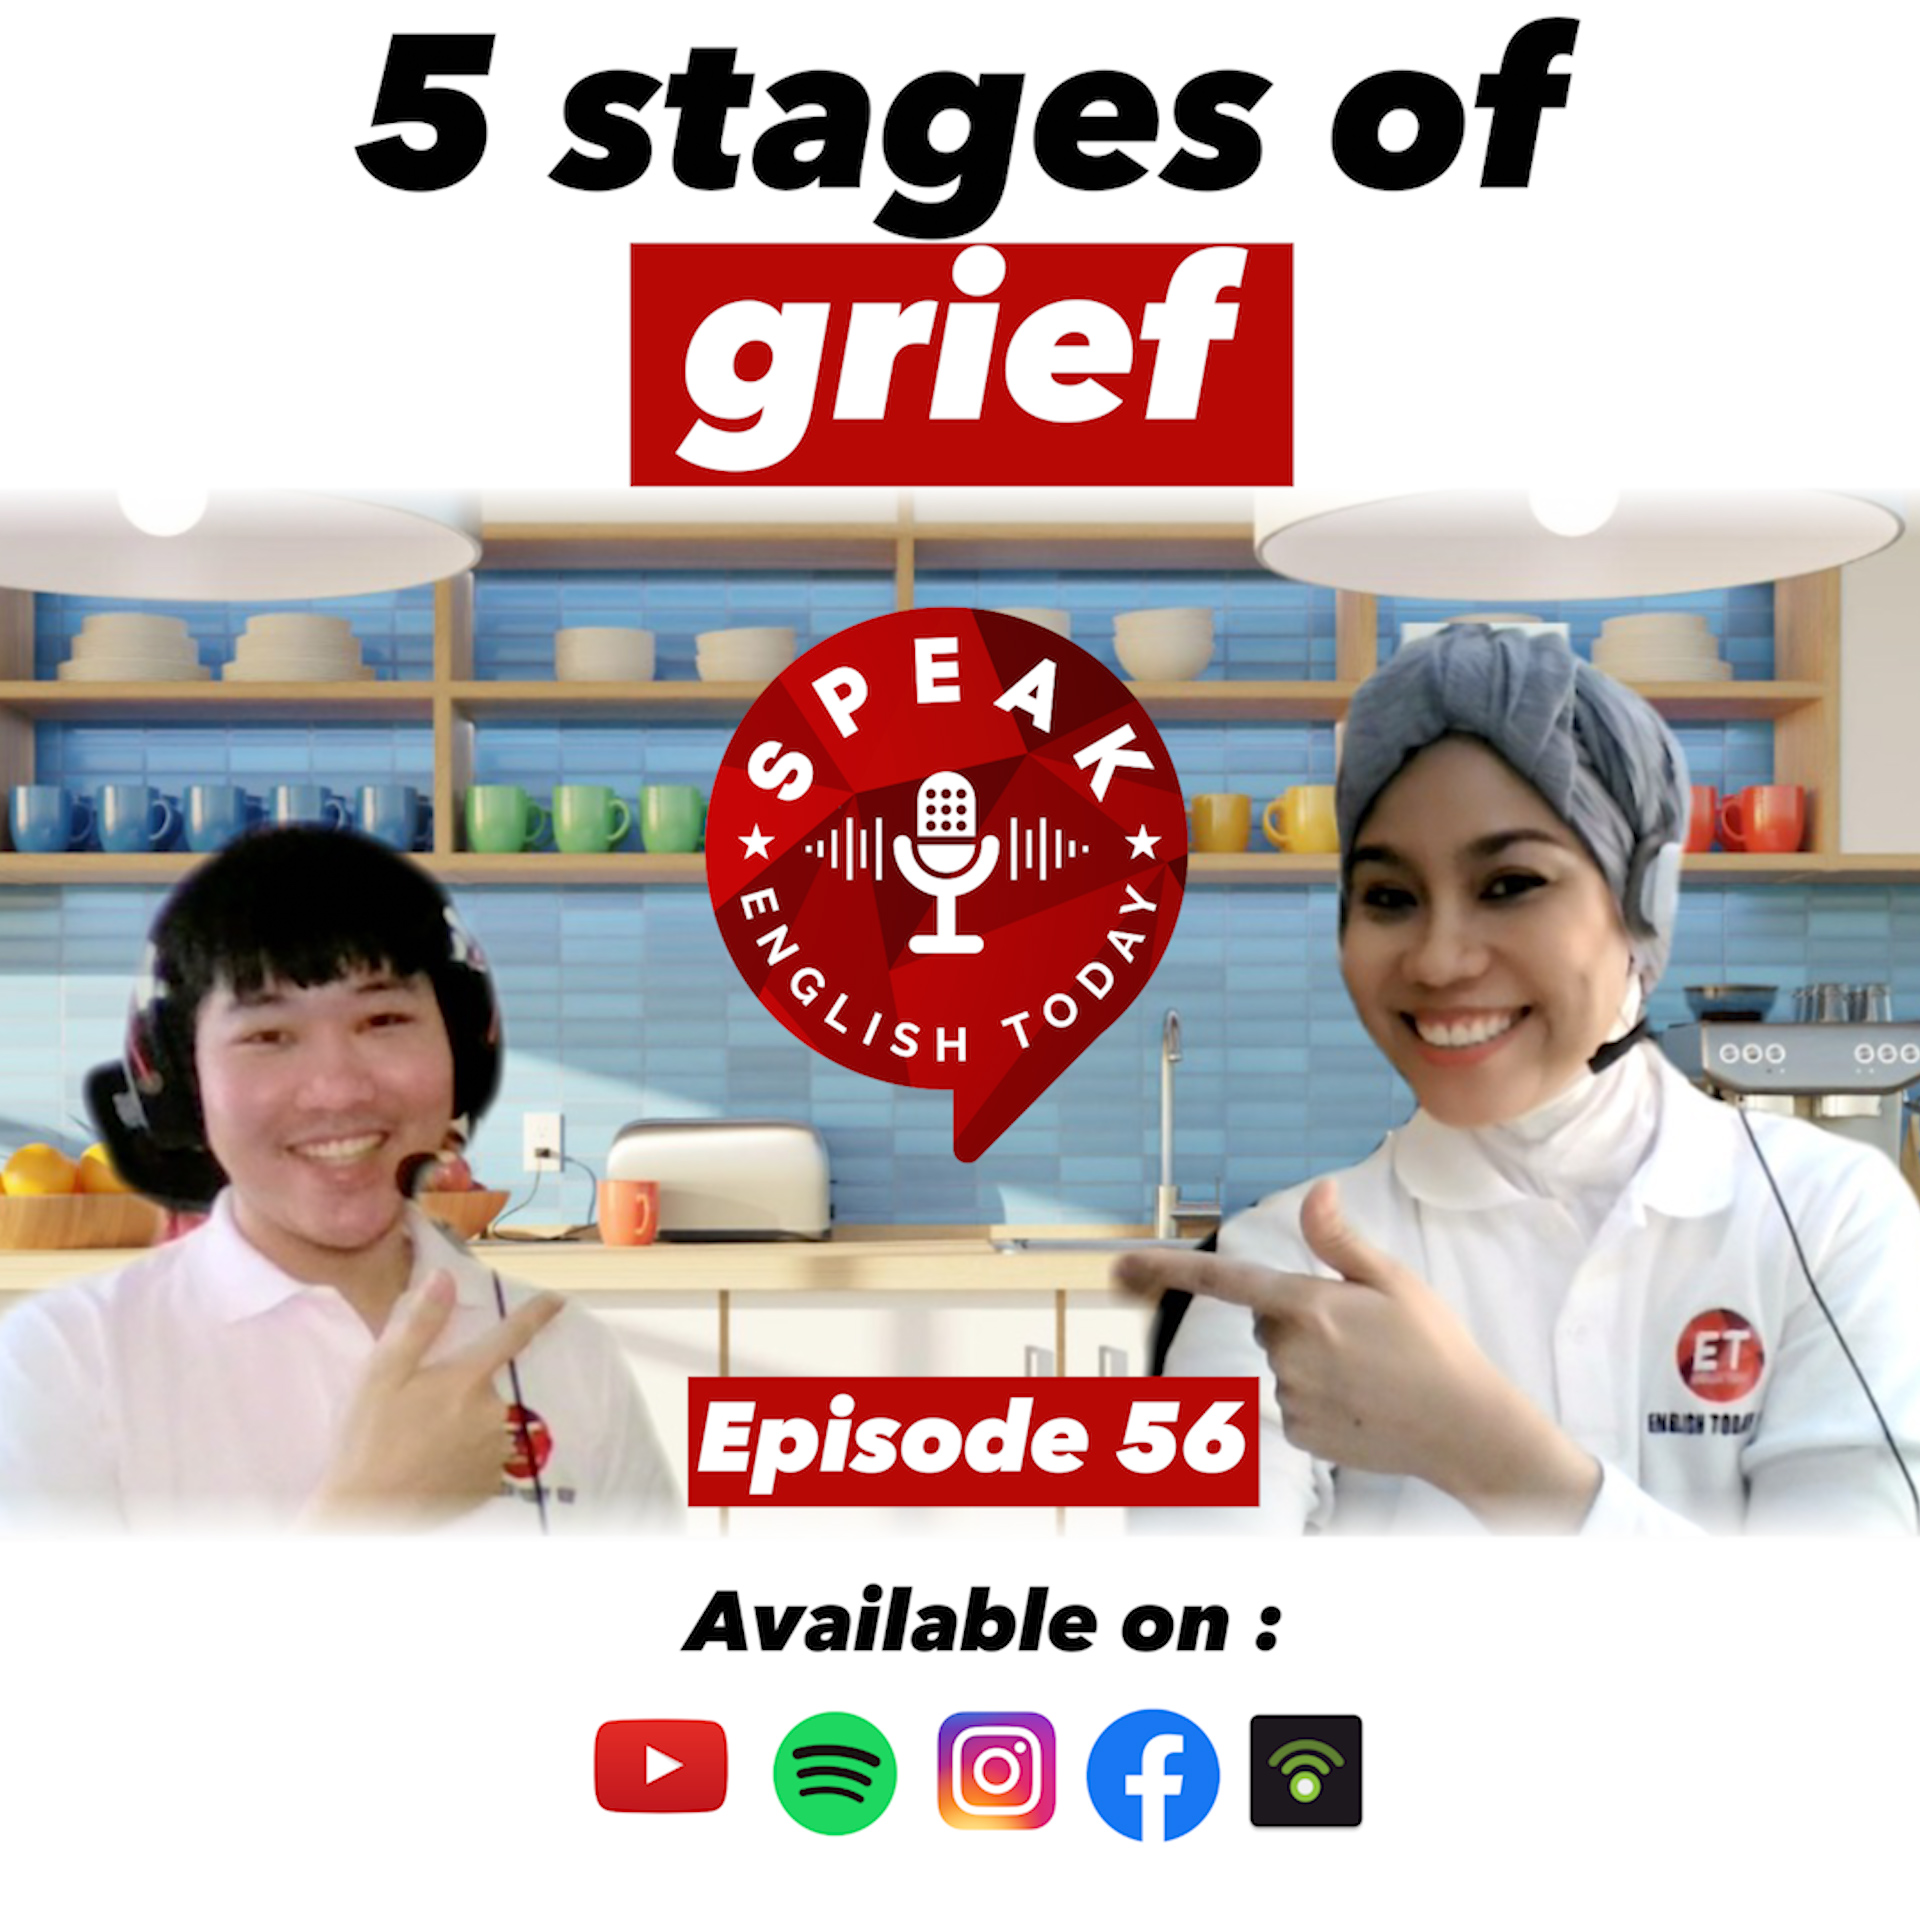 [Adulting] Episode 56: 5 Stages of Grief